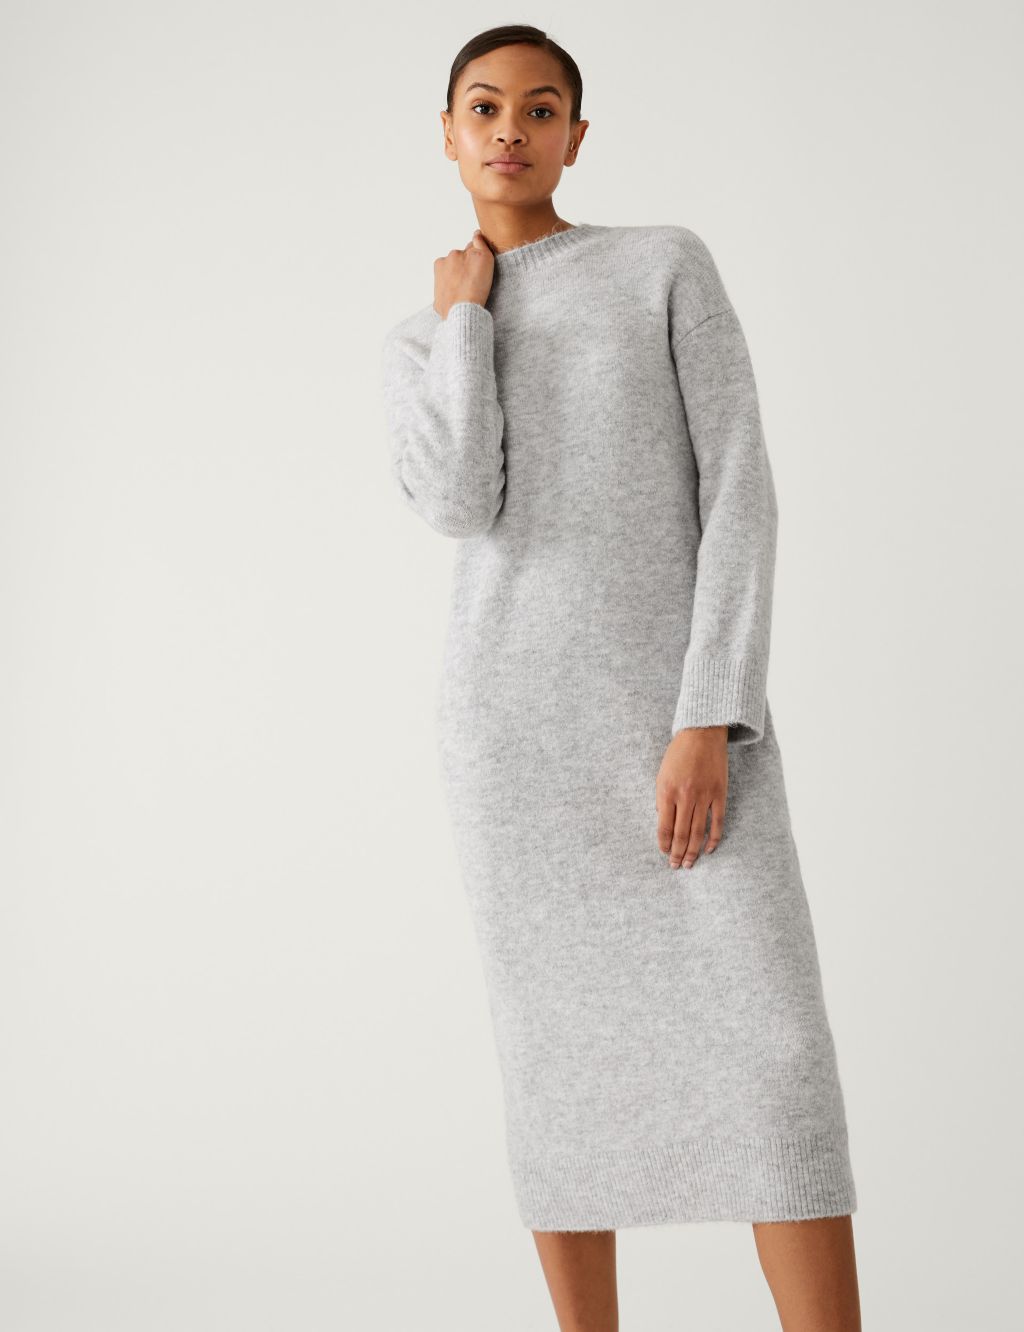 Knitted Crew Neck Dress image 1